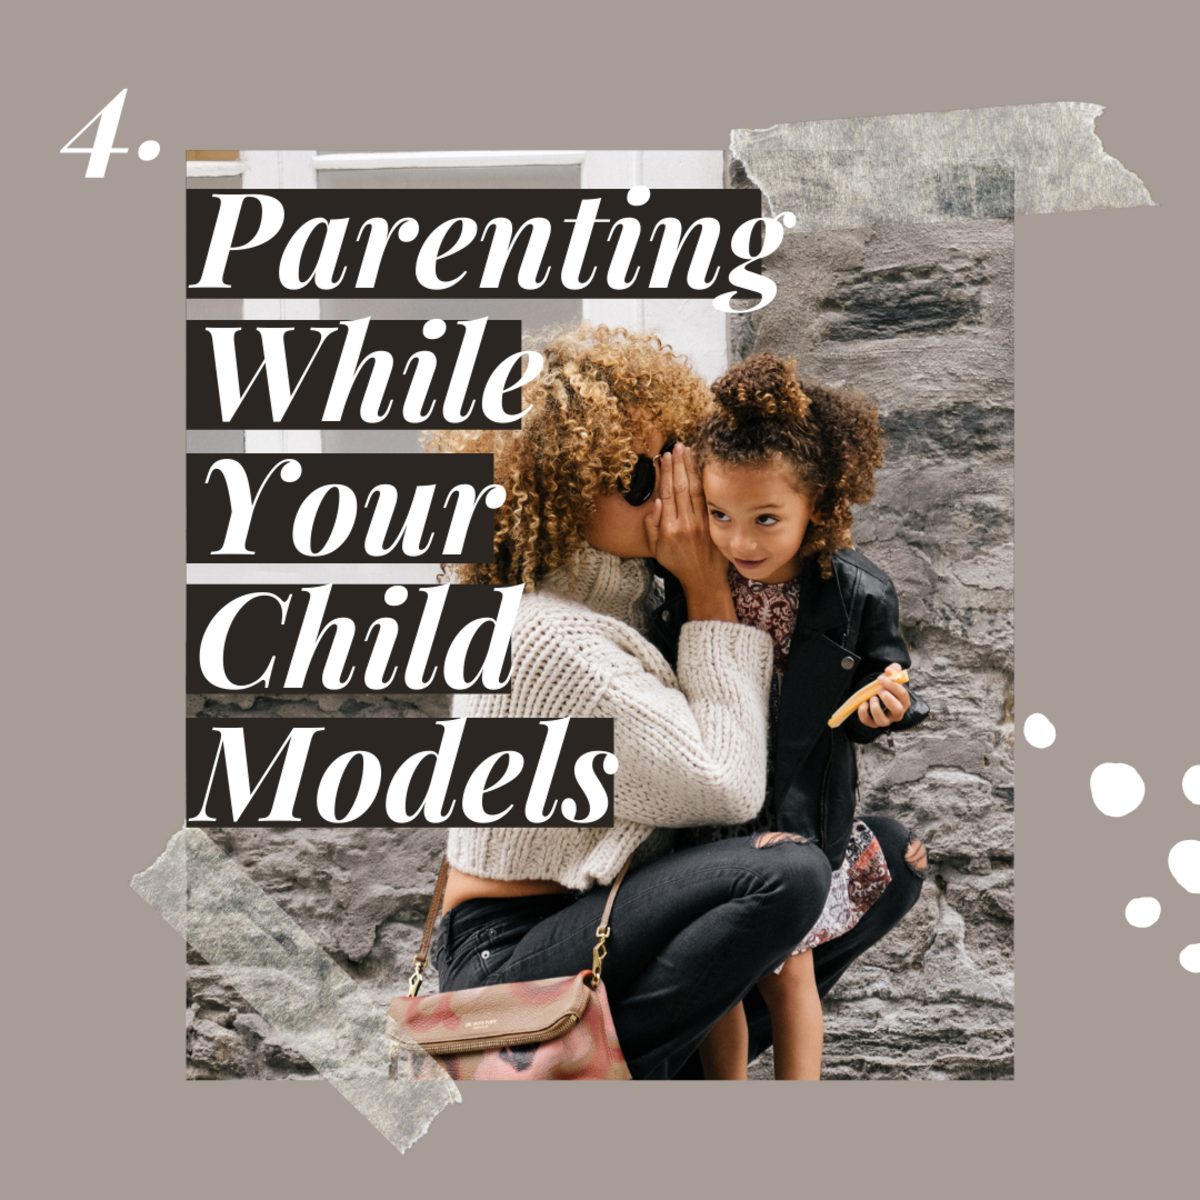 Would you make a good support system for a child model?